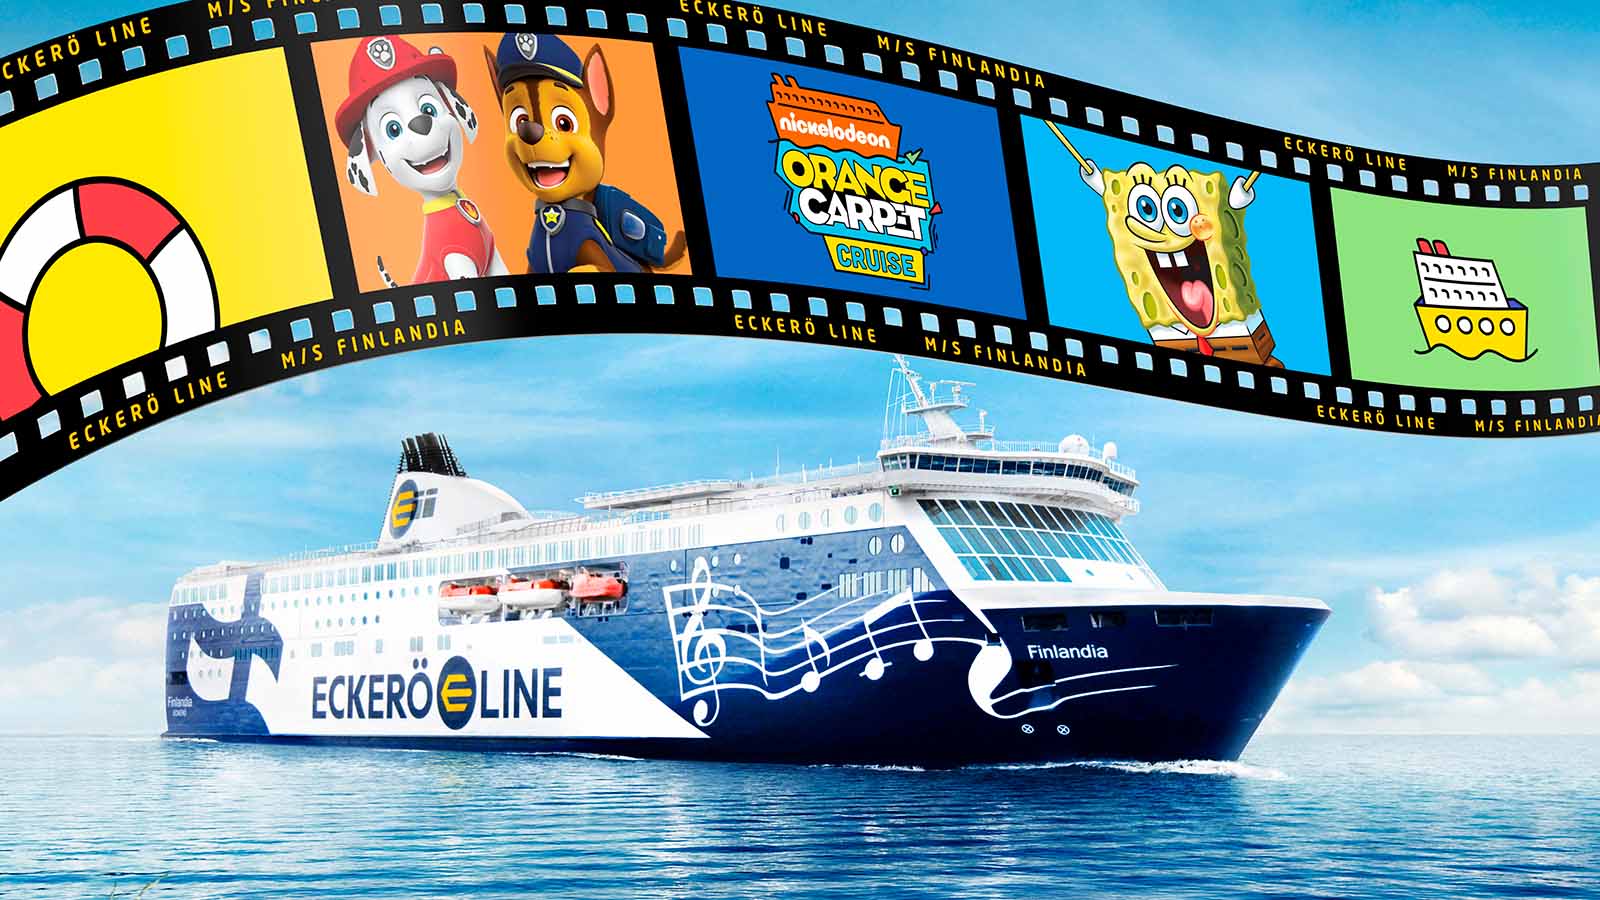 NickALive!: Nickelodeon's Most Beloved Characters Will Sail On The Orange  Carpet Cruise With Eckerö Line